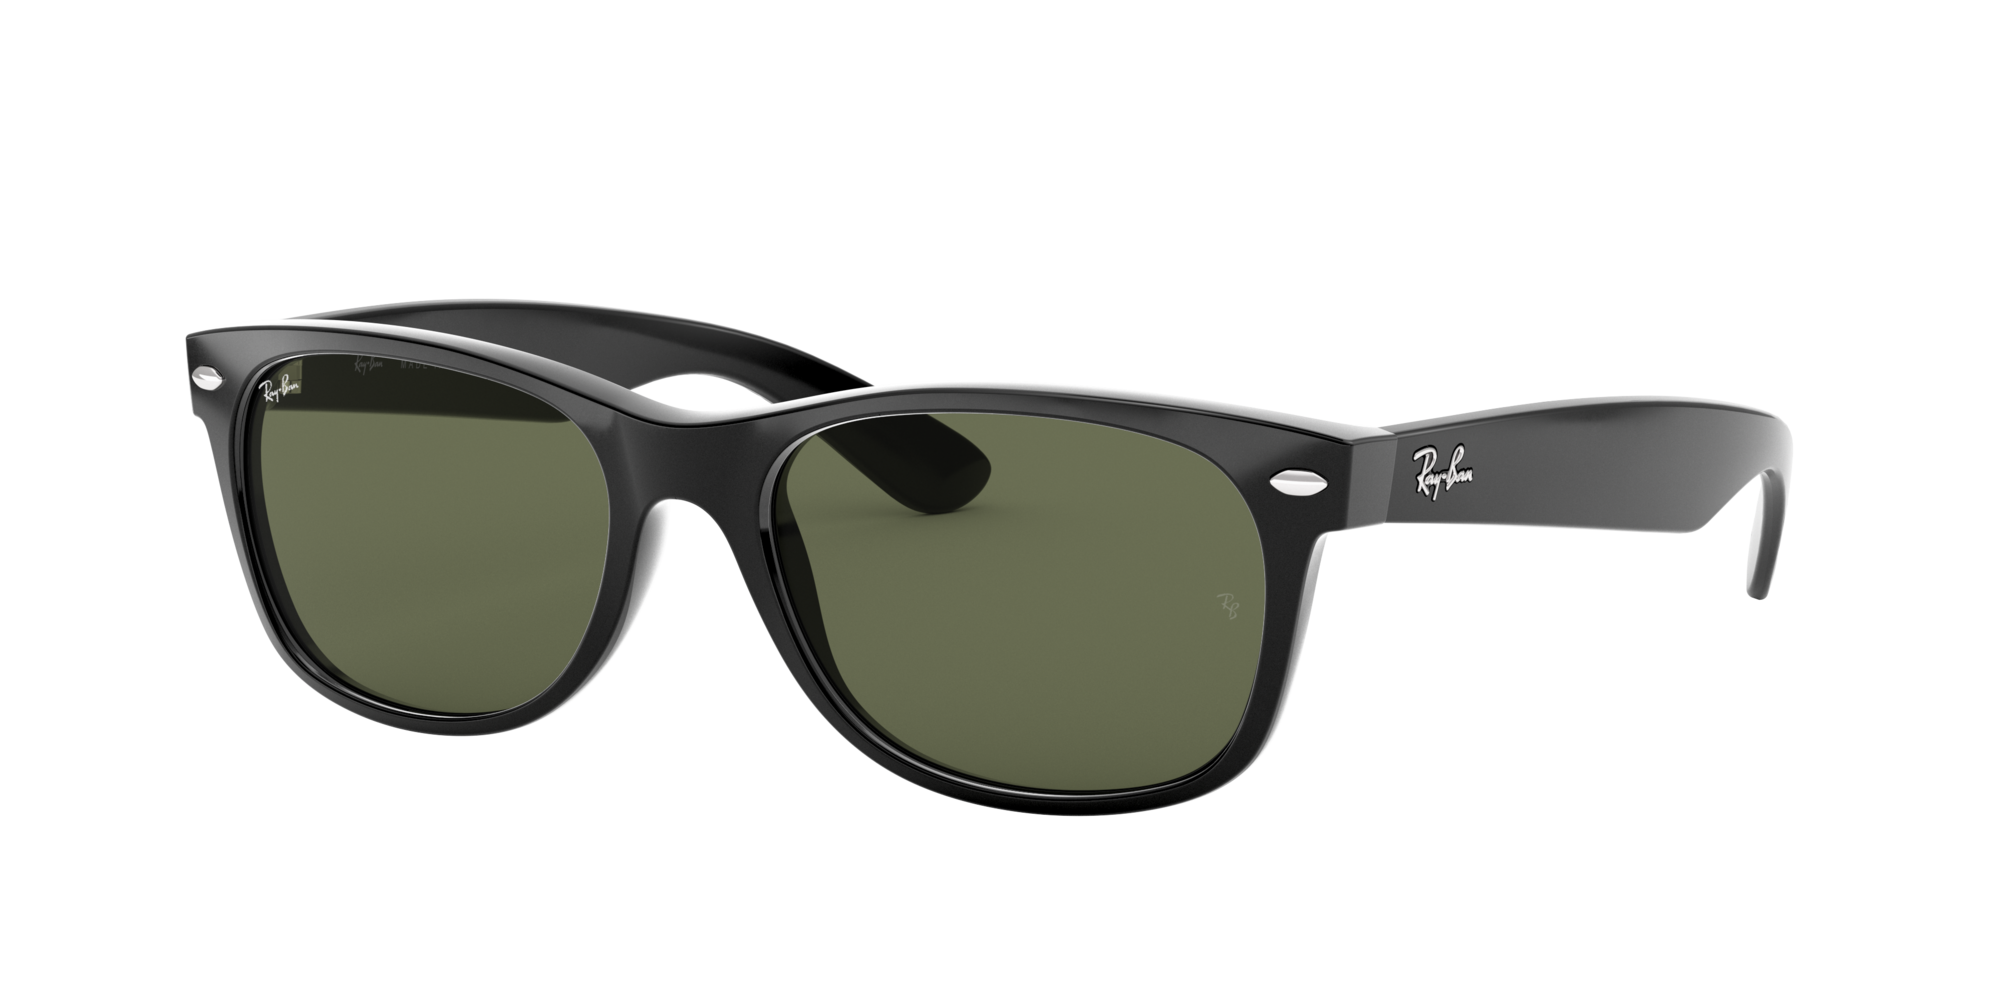 Ray-Ban 0RB2132 in Black Sunglasses | OPSM